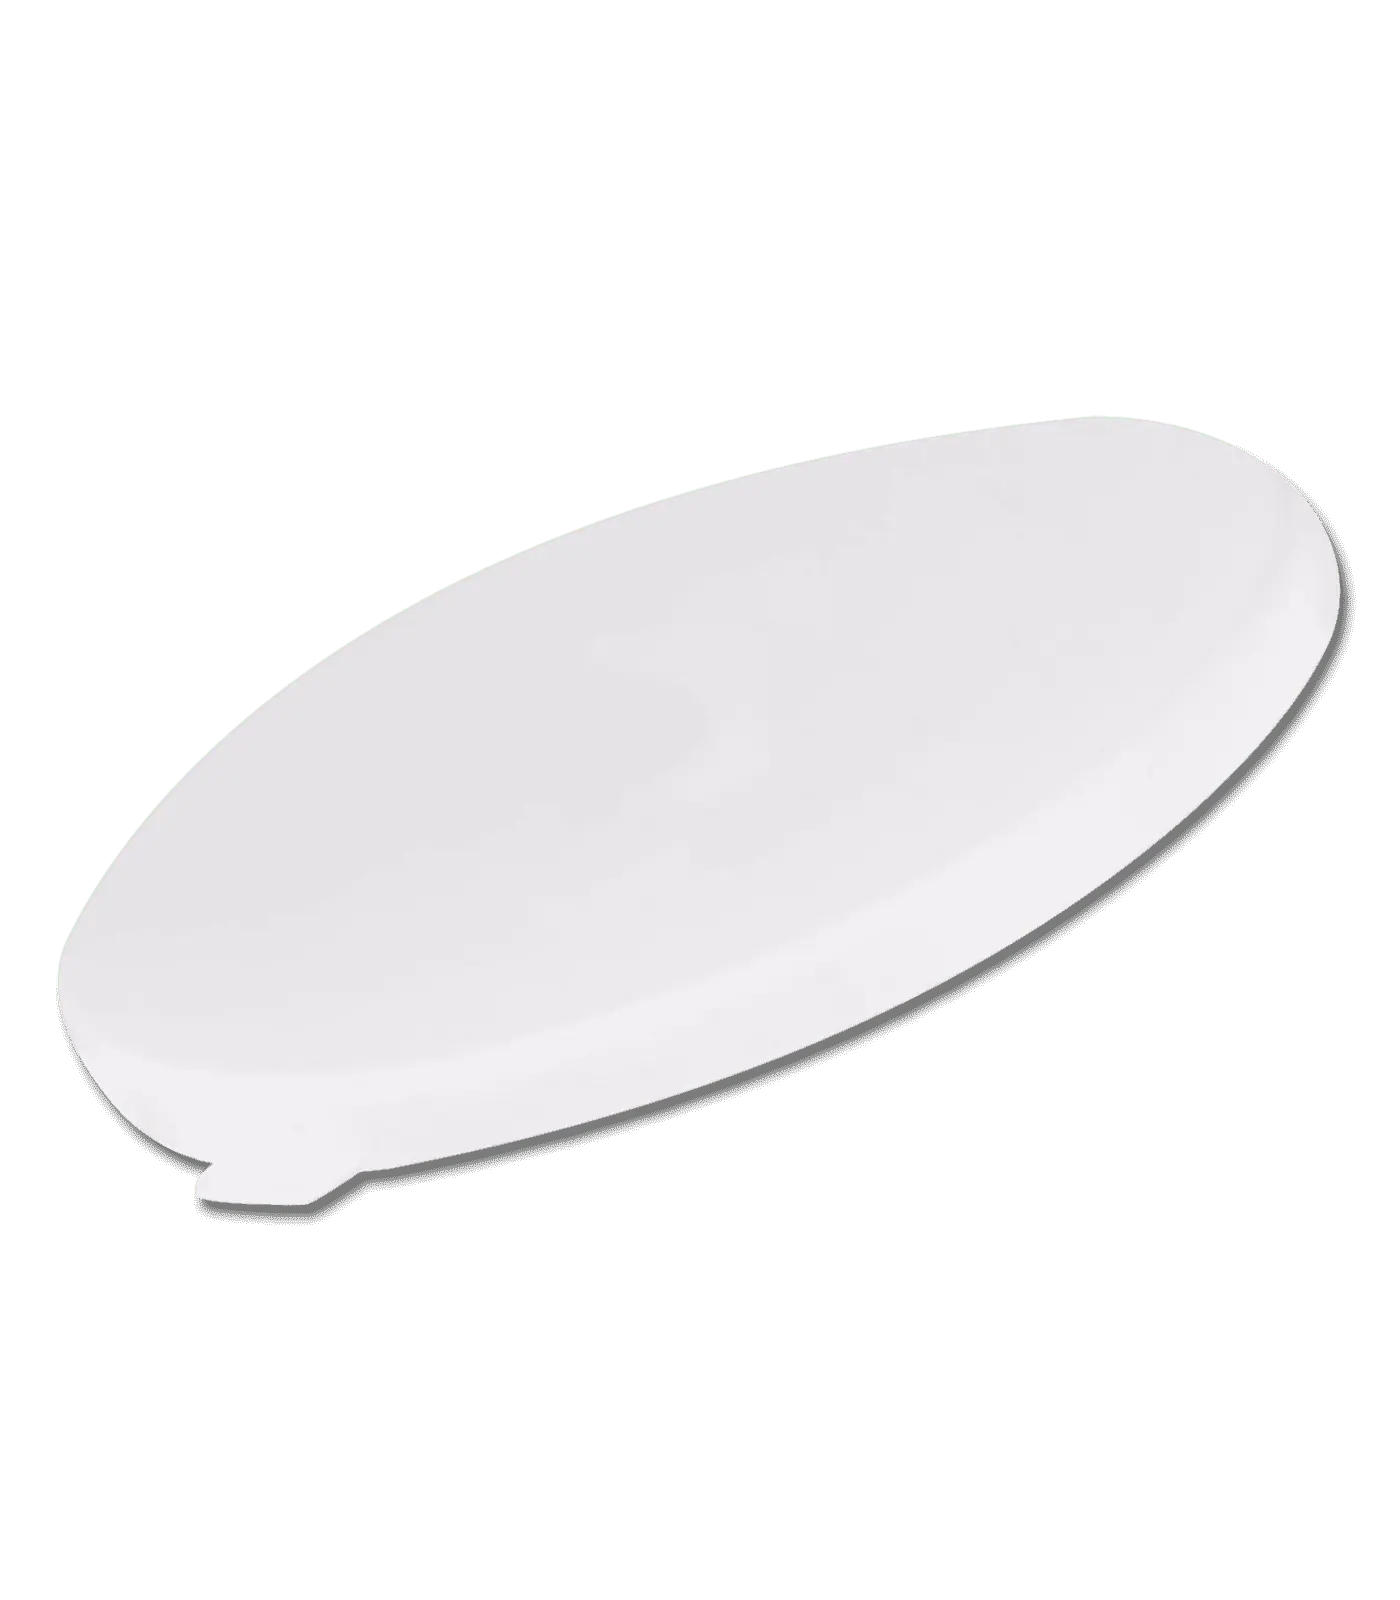 Cover for XL muesli bowl, separate 15027.., white 